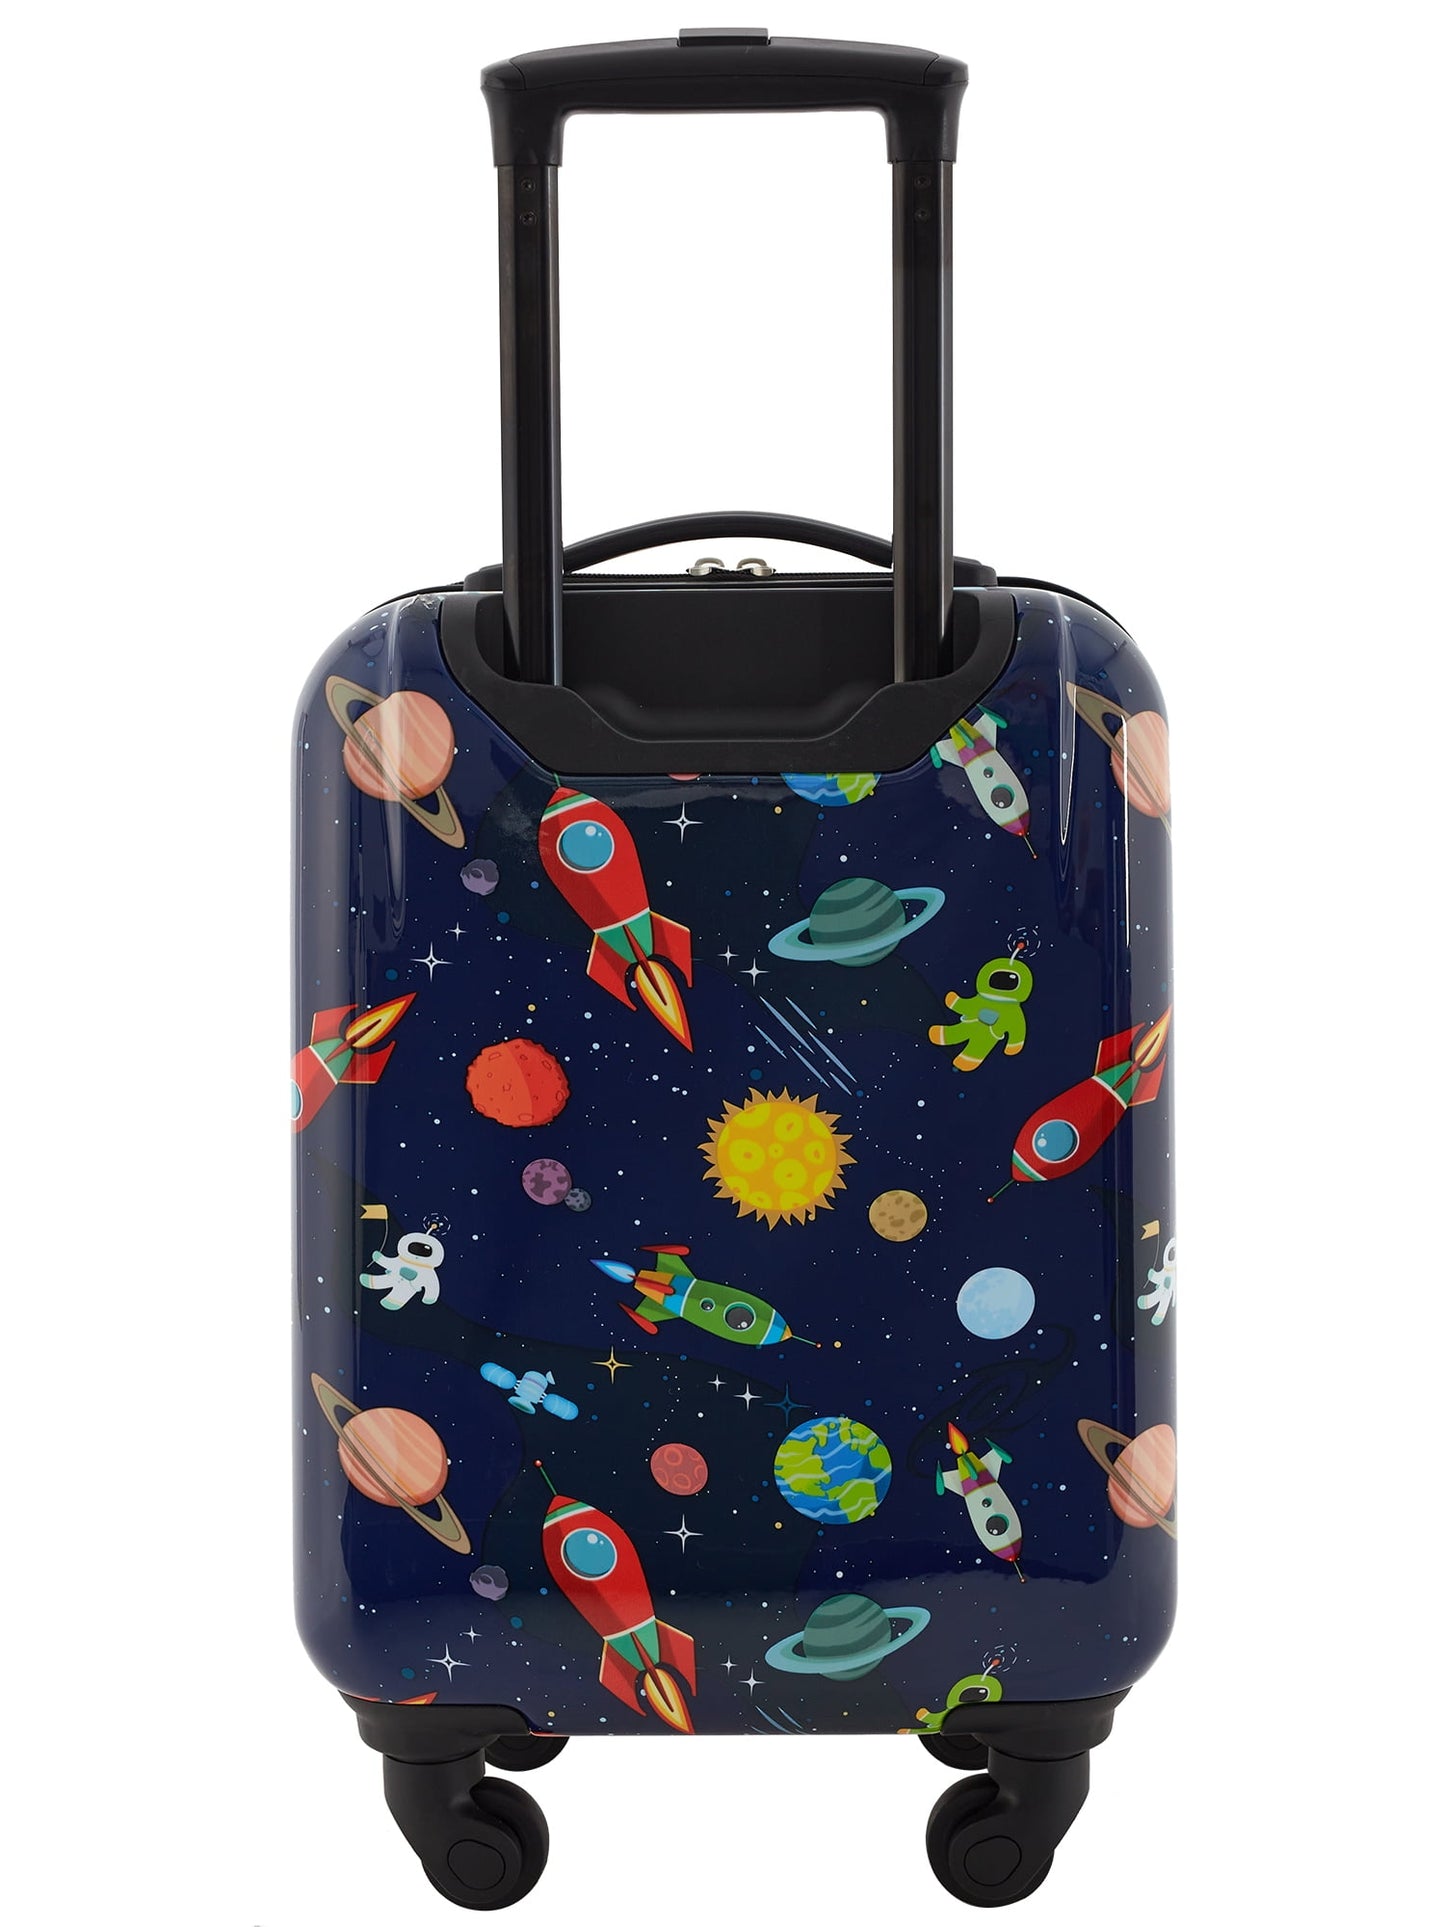 TPRC 5-Piece Kid's Hard-Side Travel Luggage Set - Butterfly Print